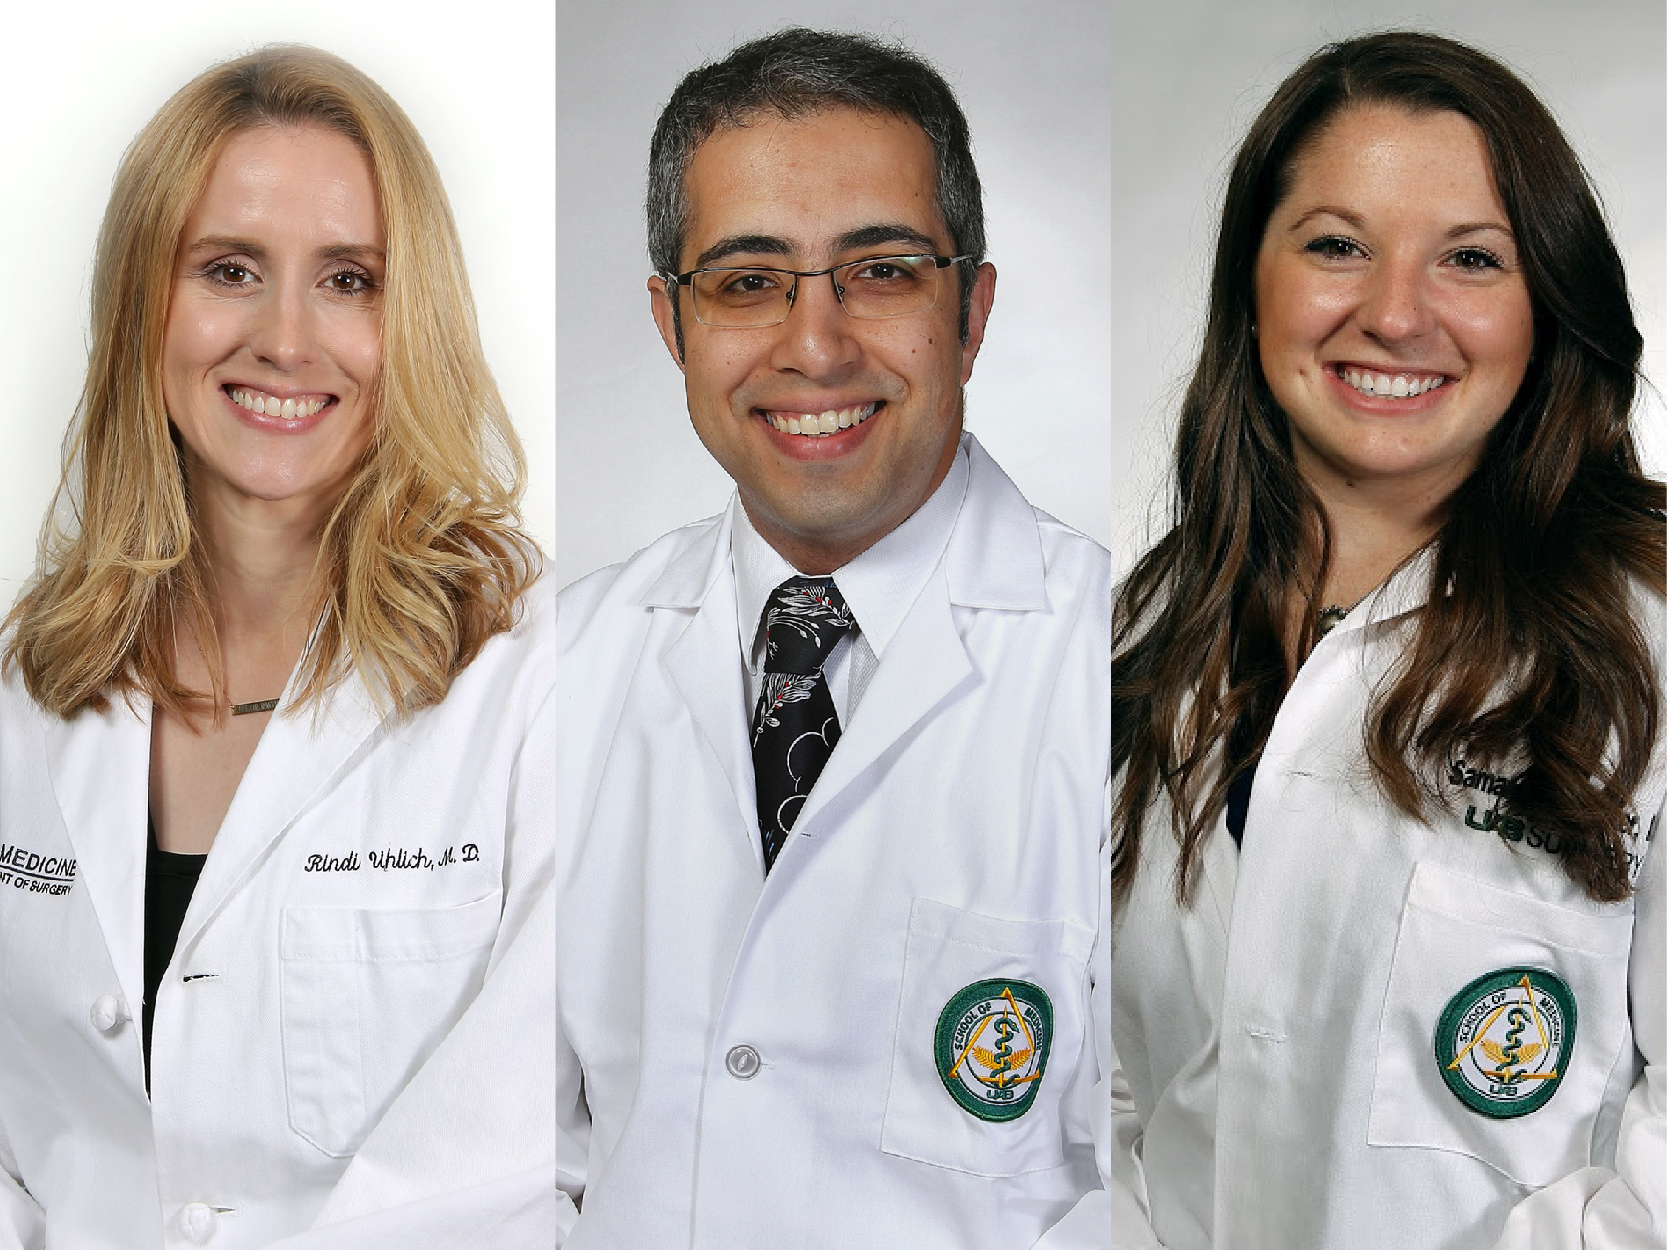 Drs. Uhlich, Rajaei and Baker